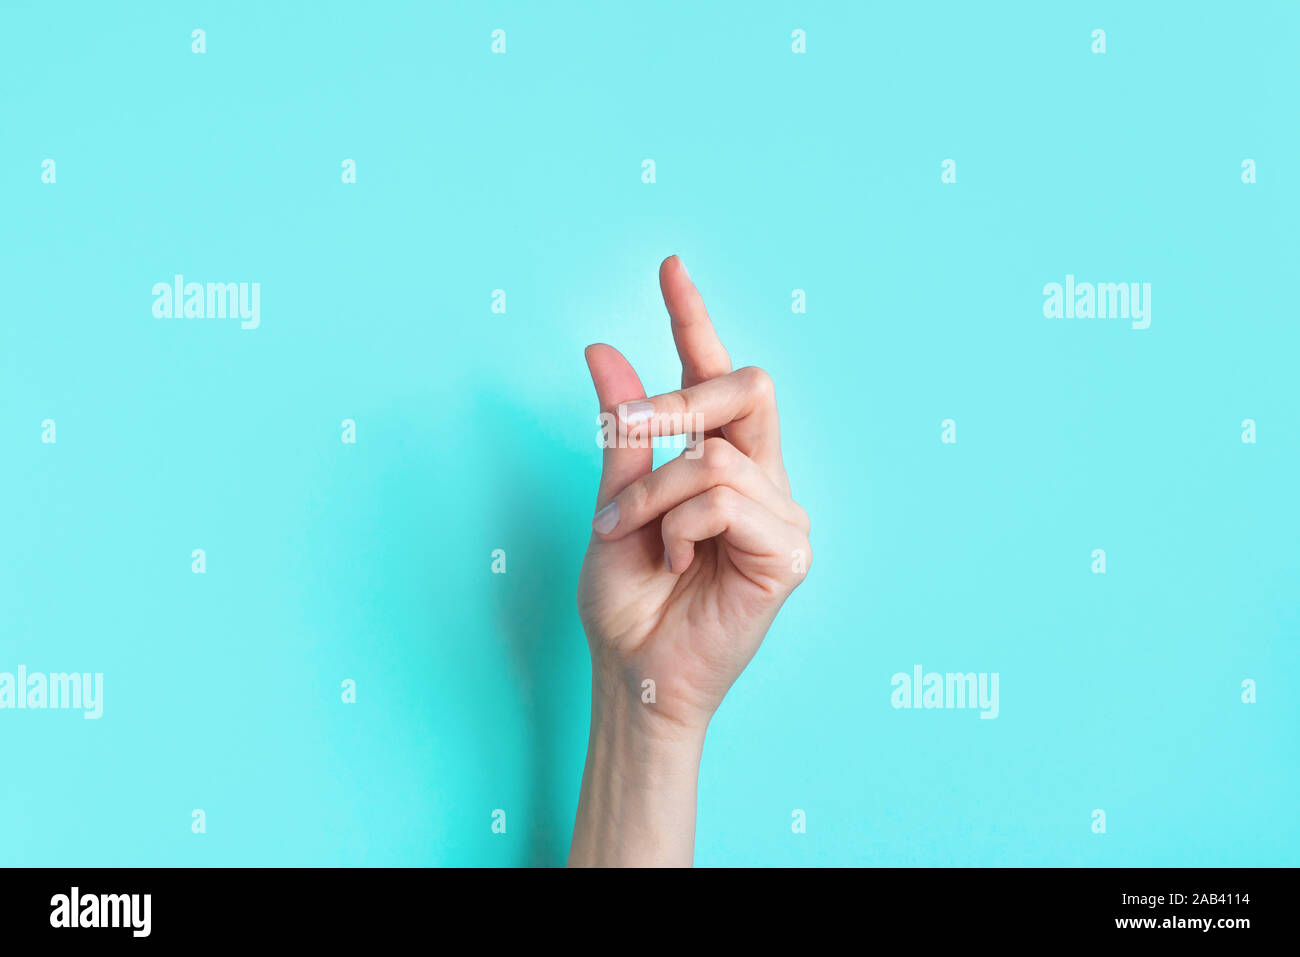 Female snapping hand on blue background, copy space. Fingers snapping. Snap gesture, minimal concept. Stock Photo